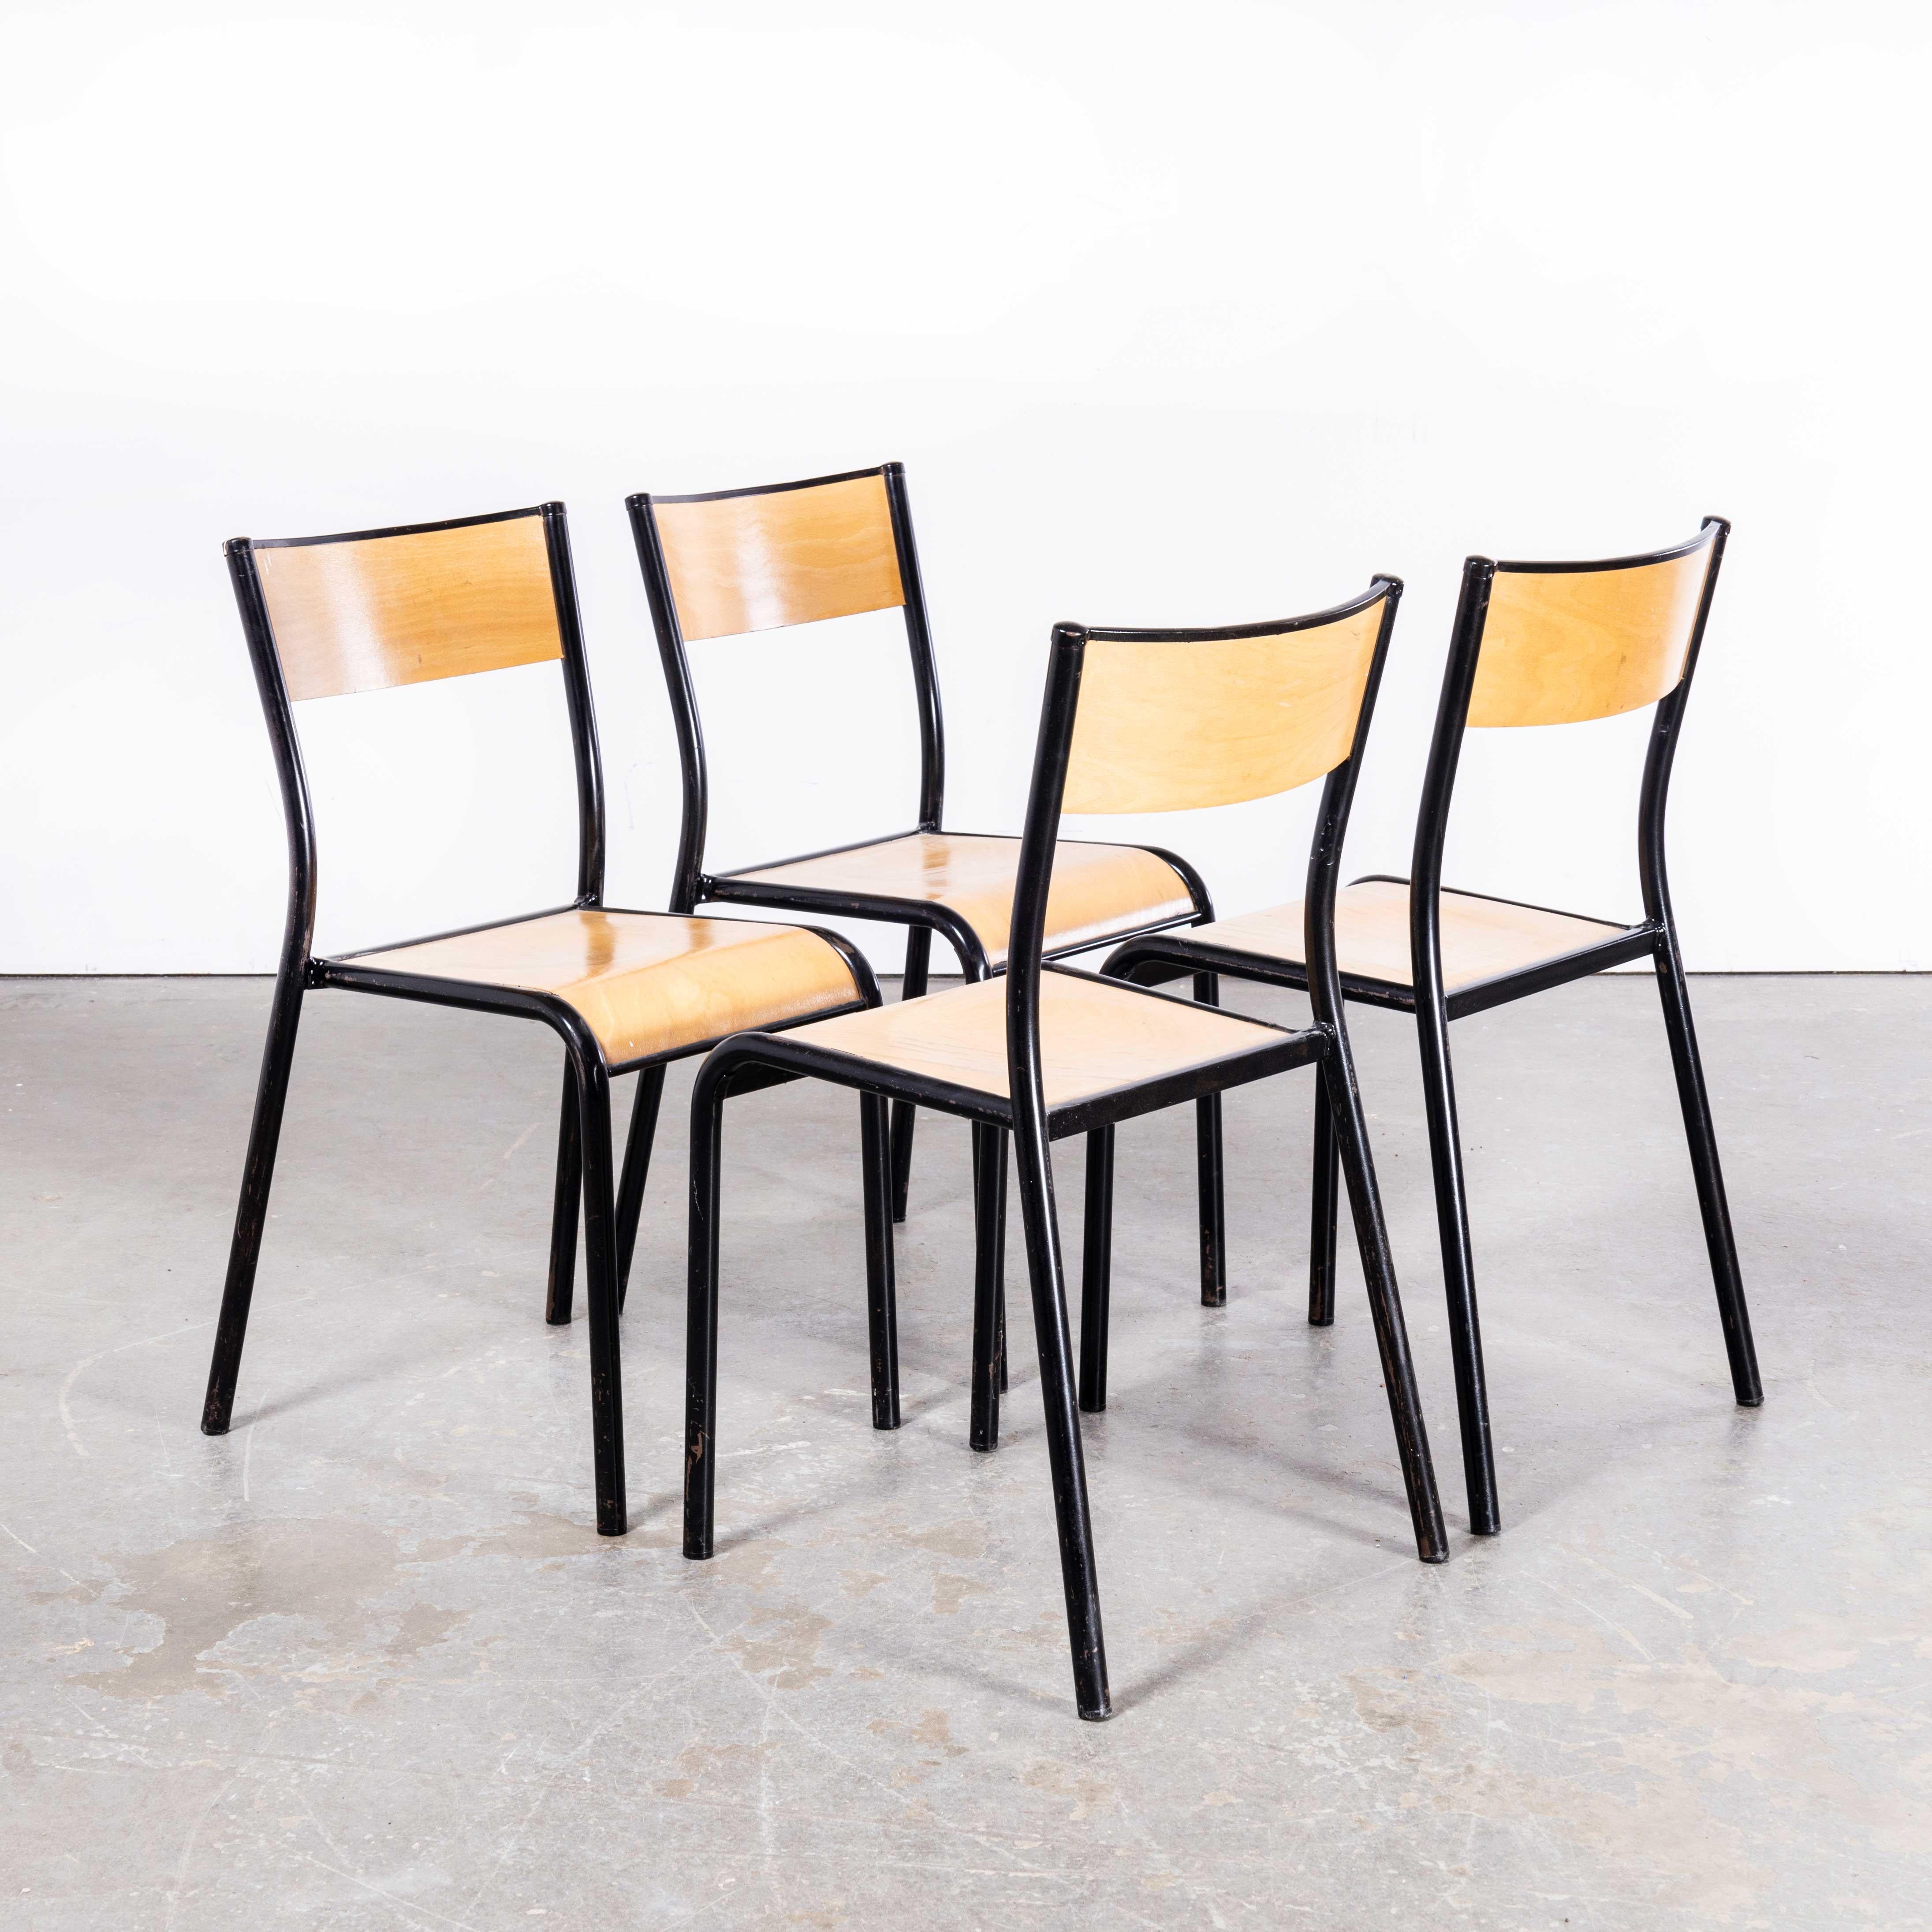 1950s French Mullca Stacking School – Dining Chairs – Black Model 510 – Set Of Four
1950s French Mullca Stacking School – Dining Chairs – Black Model 510 – Set Of Four. One of our most favourite chairs, in 1947 Robert Muller and Gaston Cavaillon